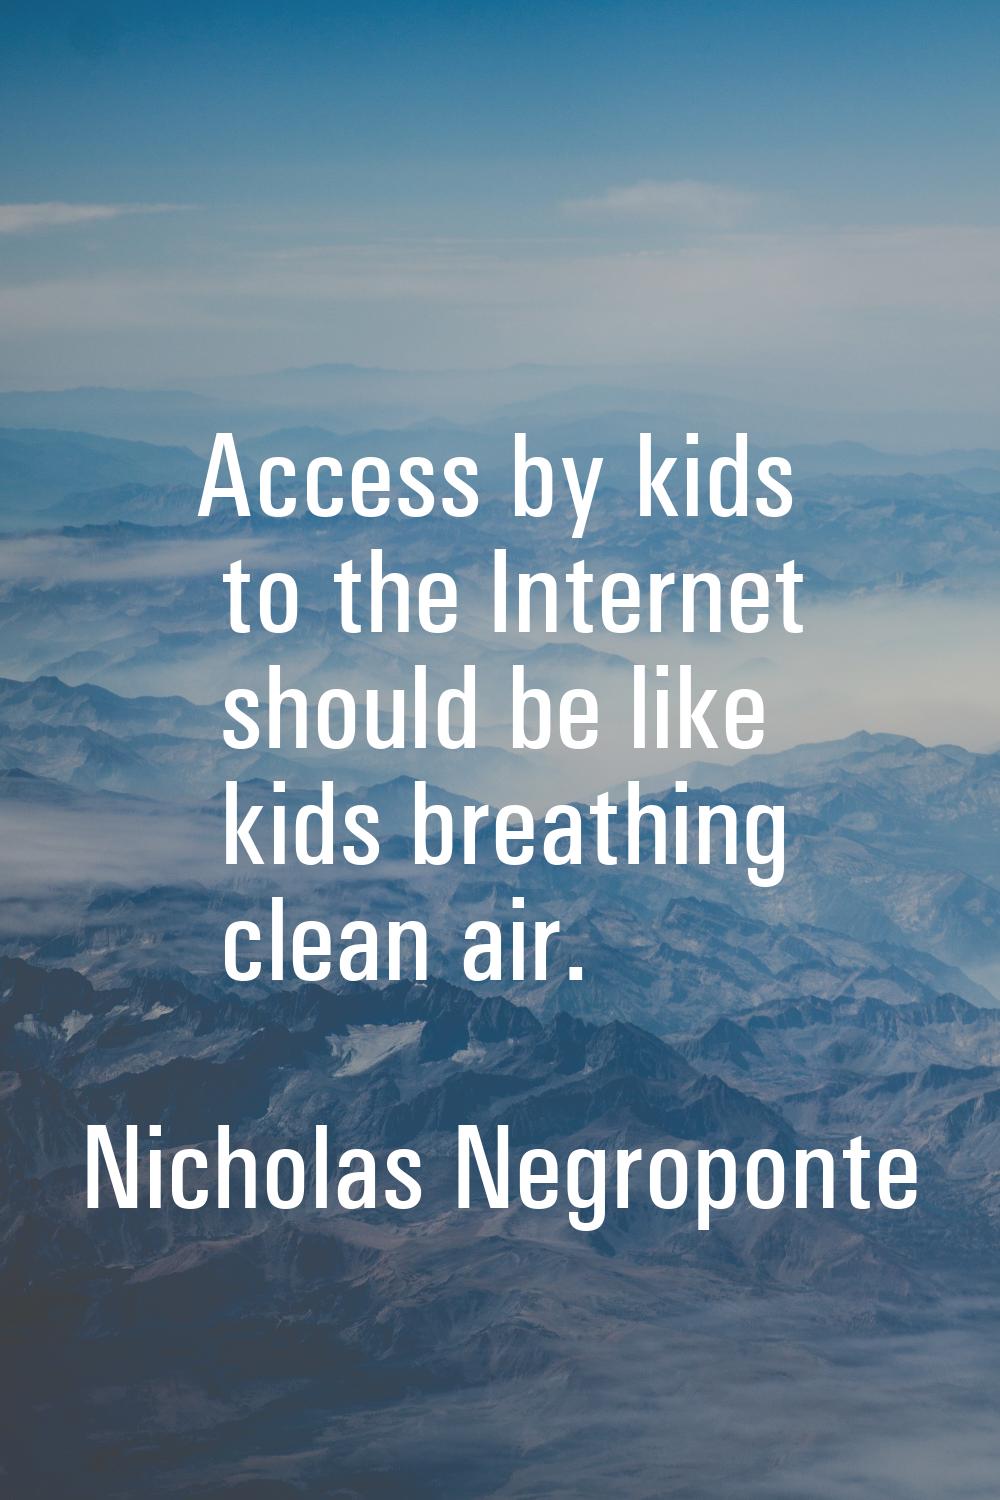 Access by kids to the Internet should be like kids breathing clean air.